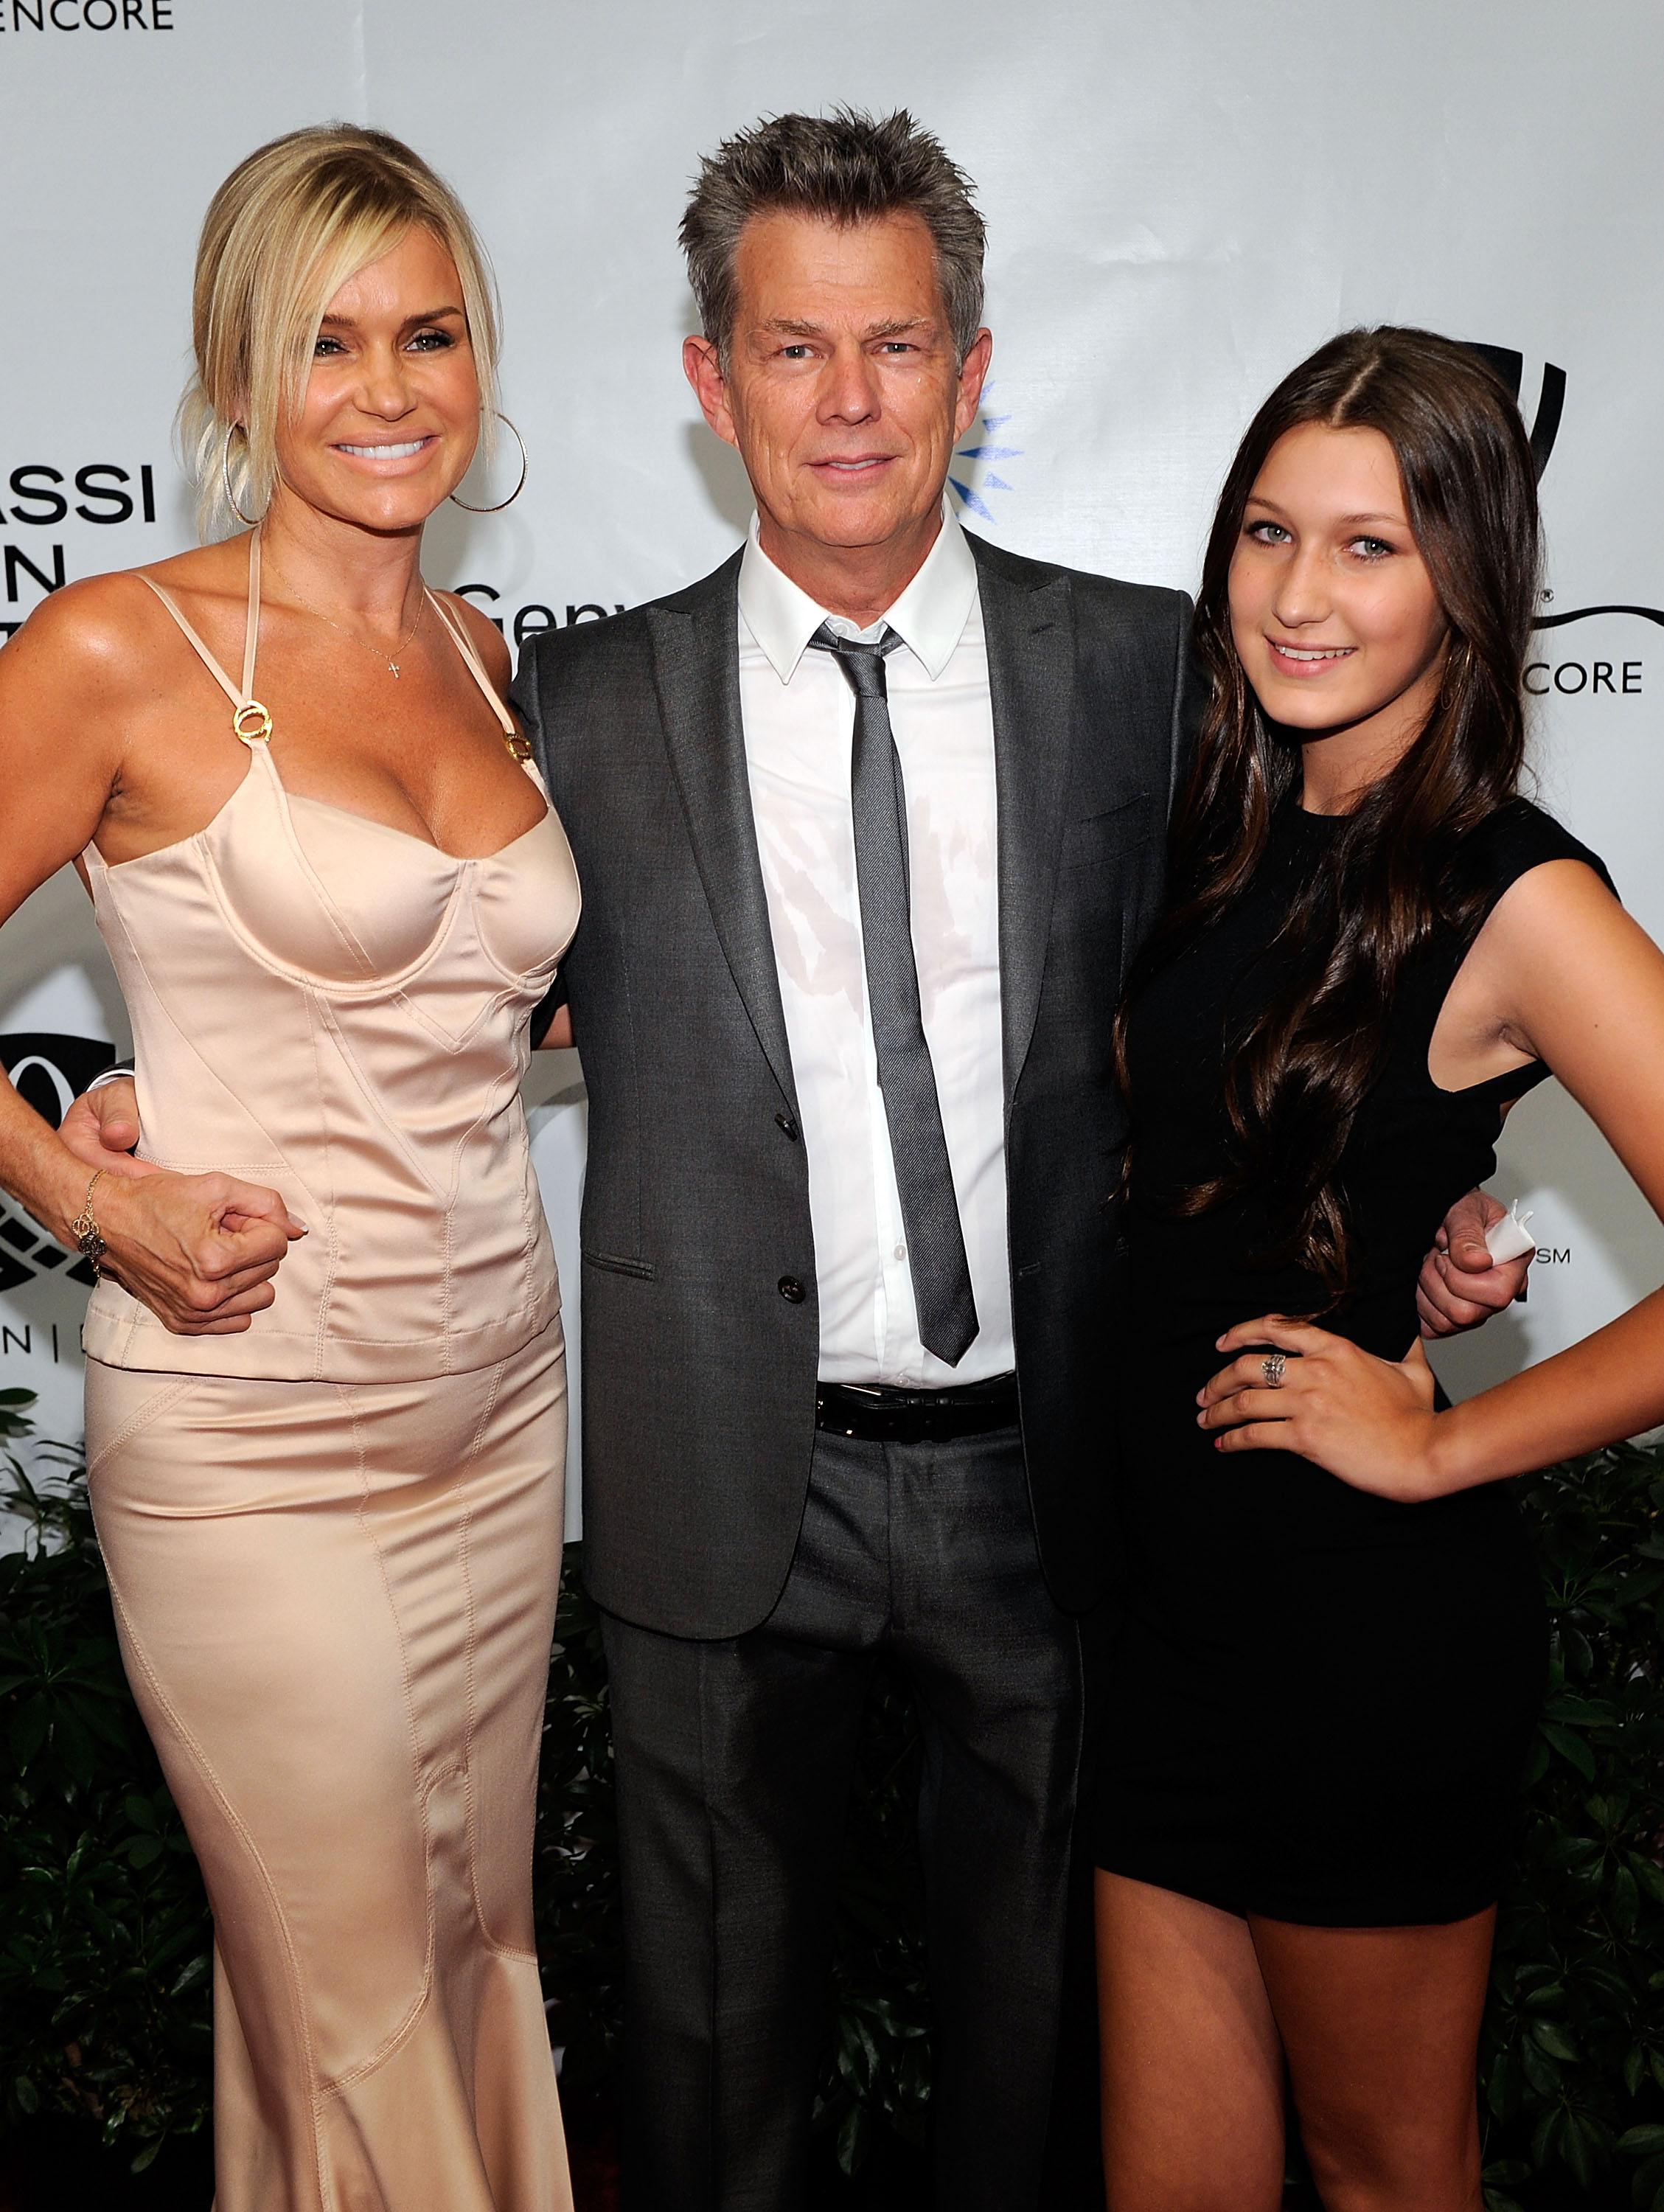 Bella Hadid with her mother, Yolanda Hadid, and music producer, David Foster, at the Andre Agassi Foundation for Education's 15th Grand Slam for Children benefit concert at the Wynn Las Vegas on October 9, 2010 in Las Vegas, Nevada | Source: Getty Images